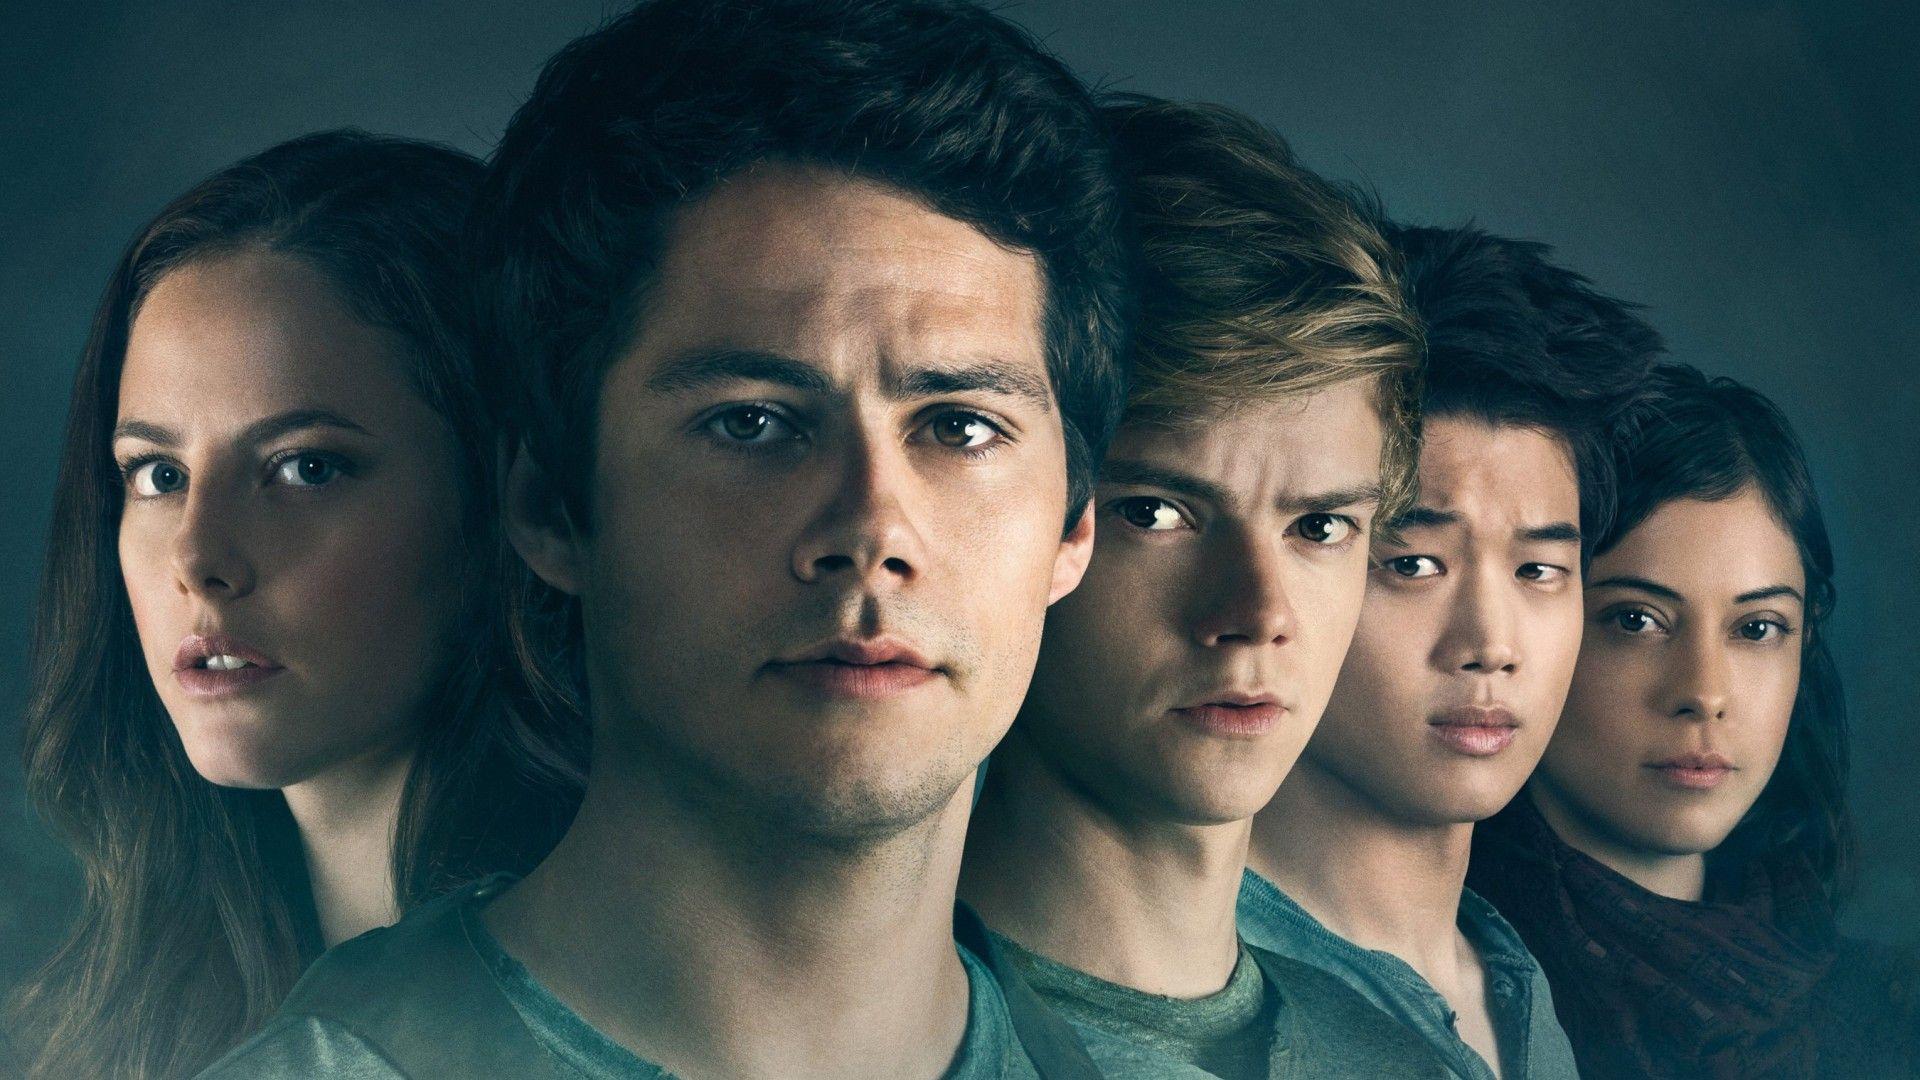 Wallpaper Maze Runner: The Death Cure, HD, Movies